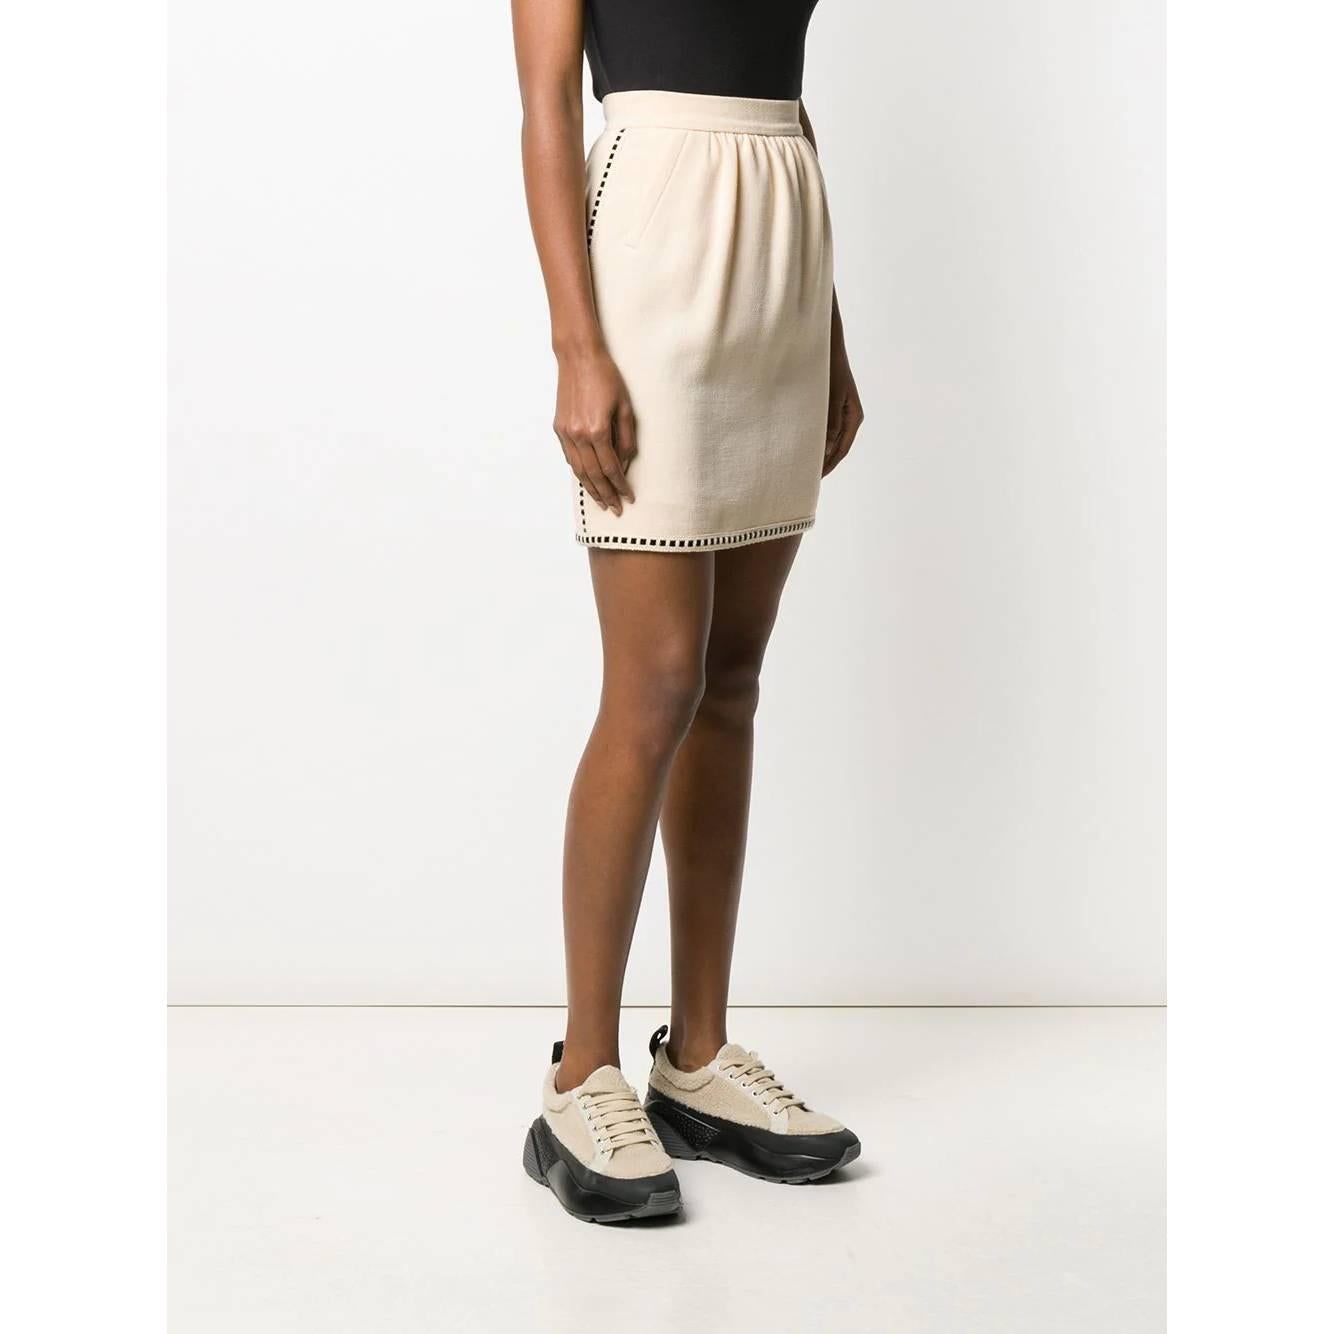 A.N.G.E.L.O. Vintage - ITALY
Chanel beige wool miniskirt with black braided ribbon. High-waisted model with decorative pleats. Front welt pockets and back fastening with zip and hooks.

Years: 90s

Made in France

Size: 36 FR

Flat